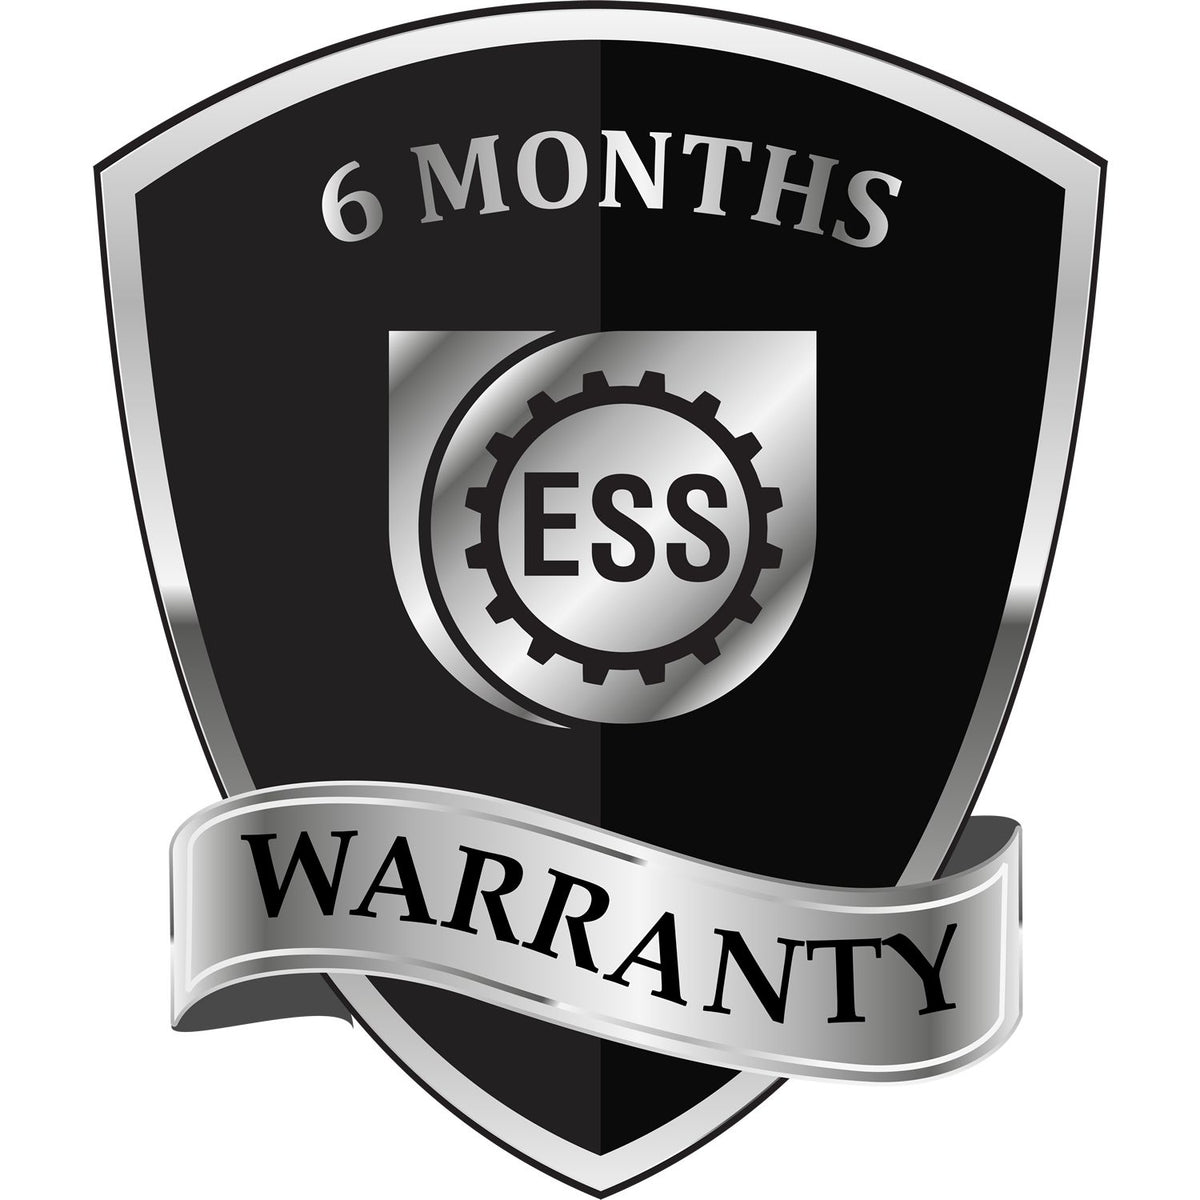 A badge or emblem showing a warranty icon for the California Professional Engineer Seal Stamp